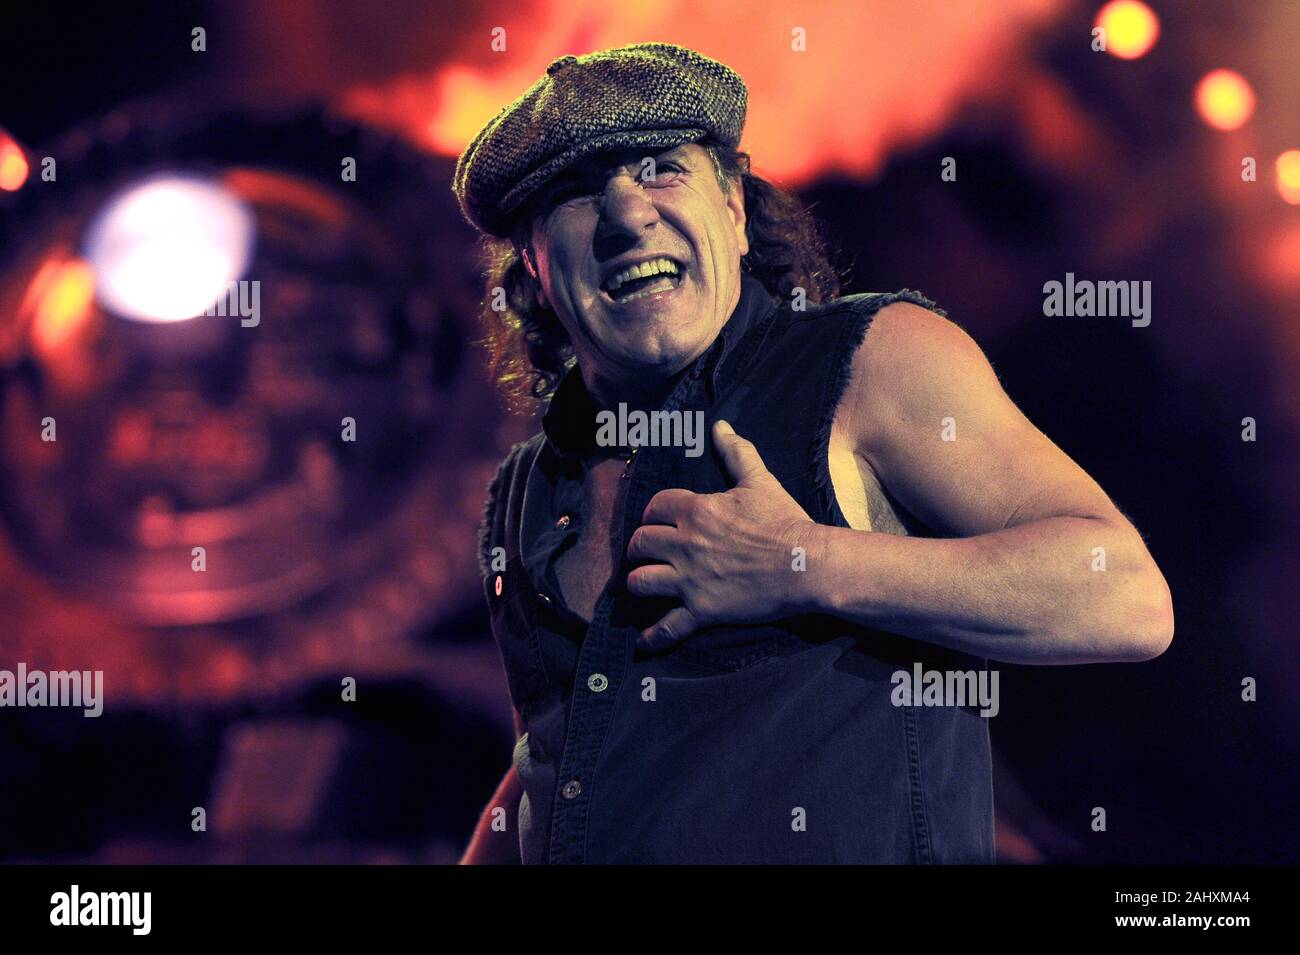 Udine Italy 05/19/2010 : Live concert of ACDC at the Stadio Friuli,Brian Johnson during the concert Stock Photo